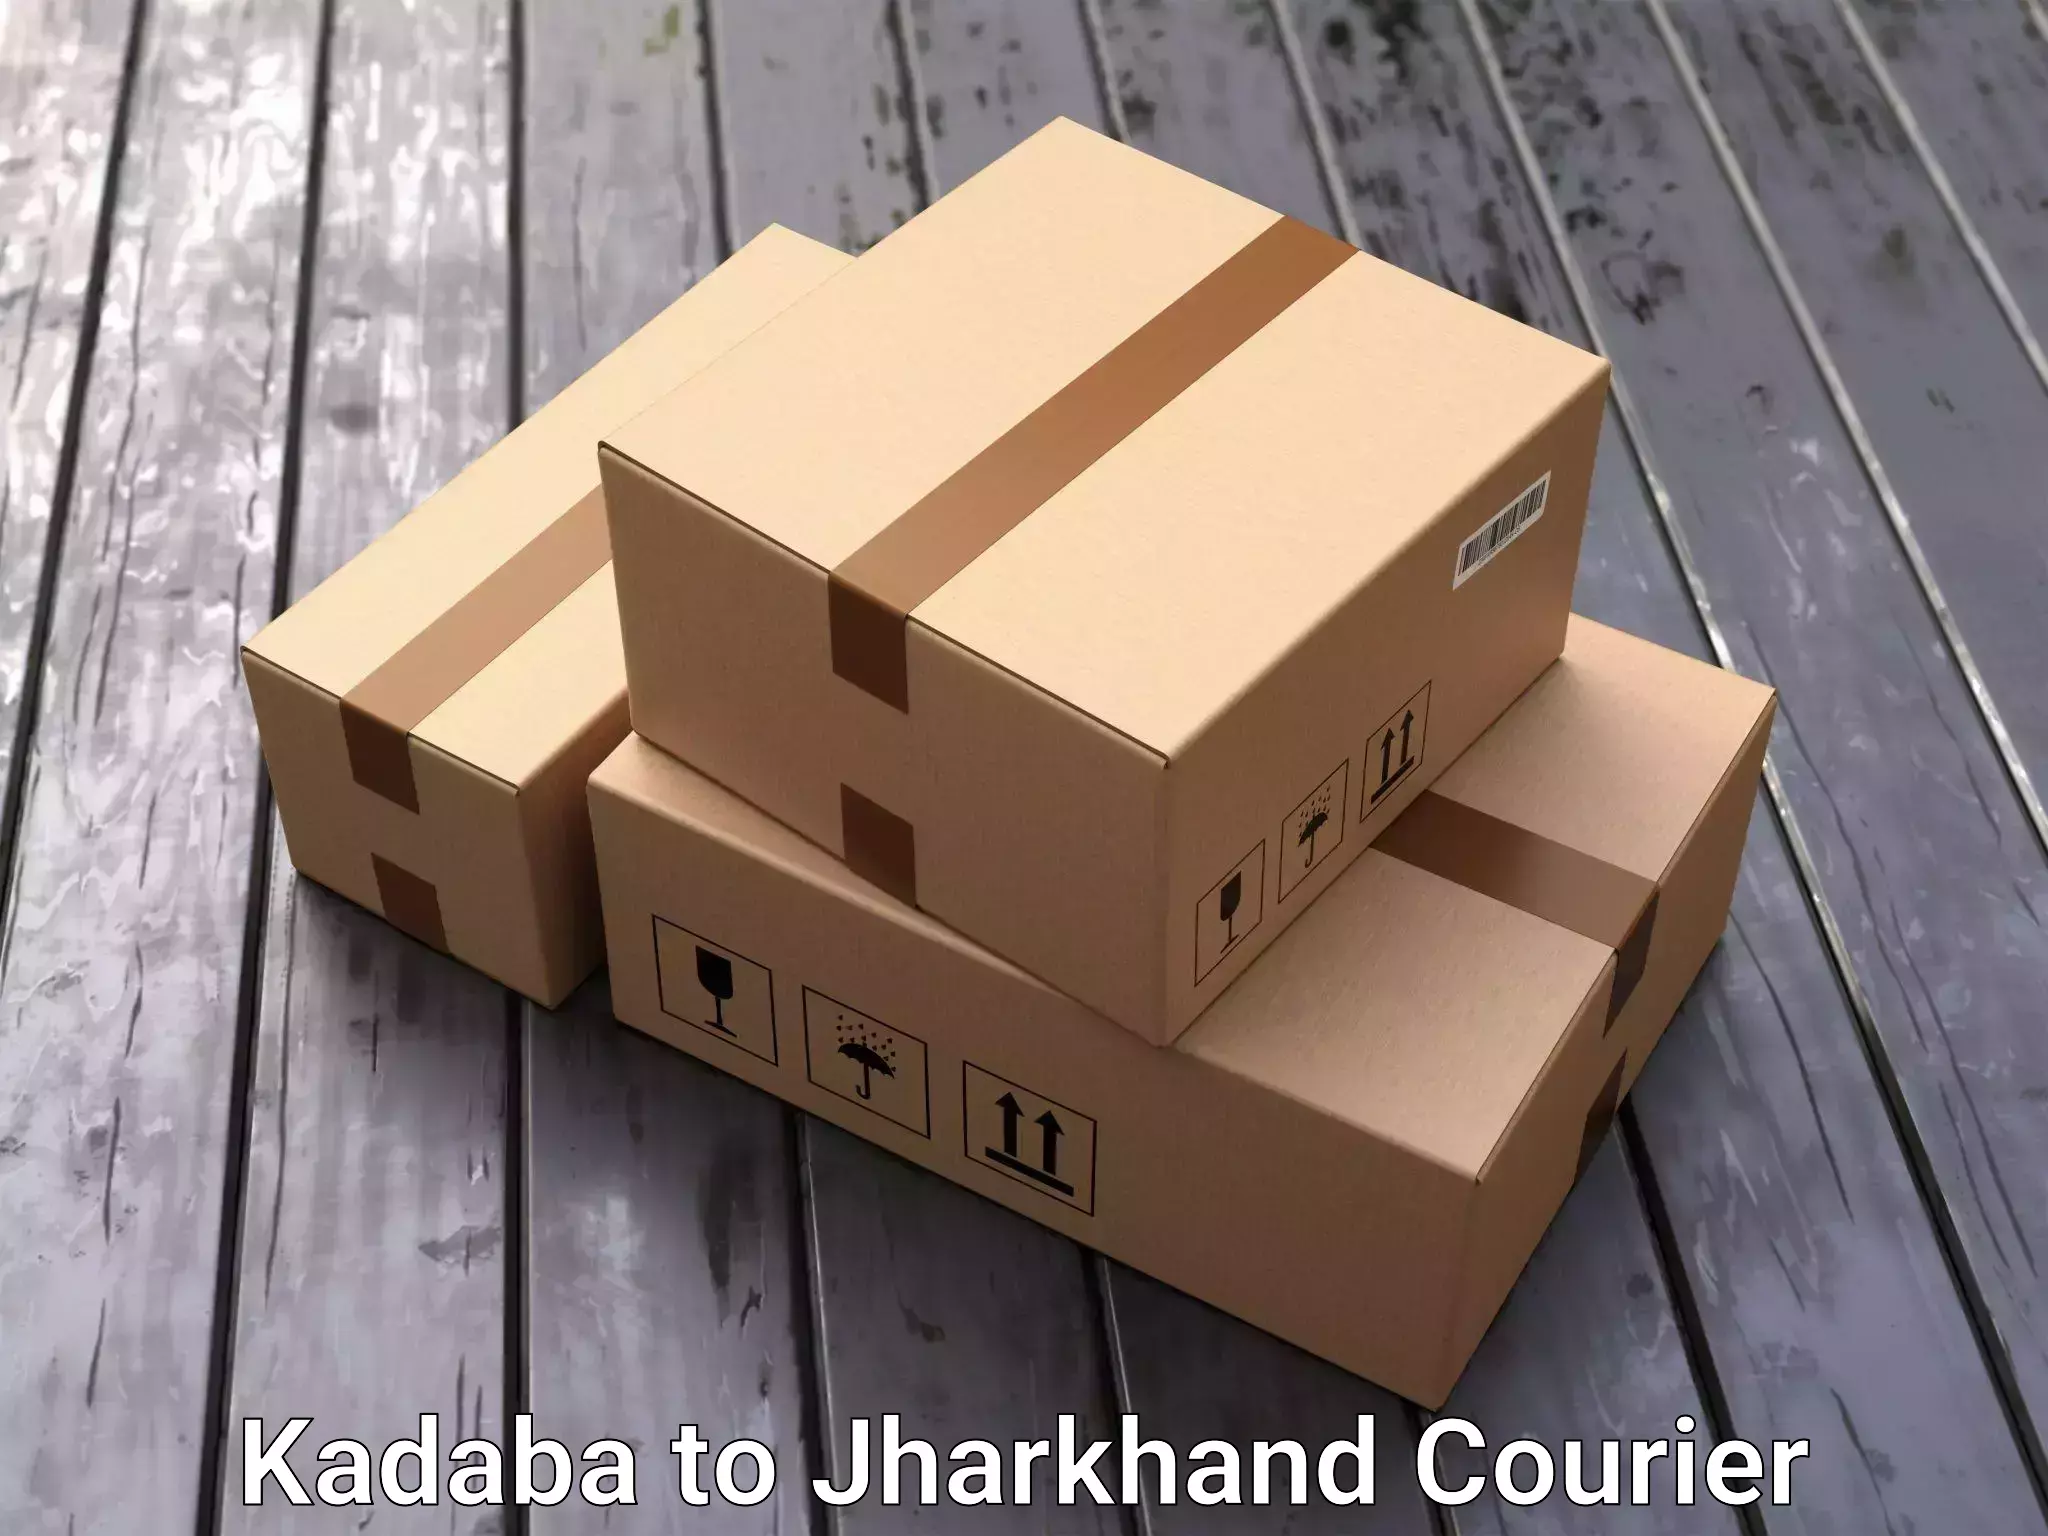 Personalized moving plans Kadaba to Domchanch